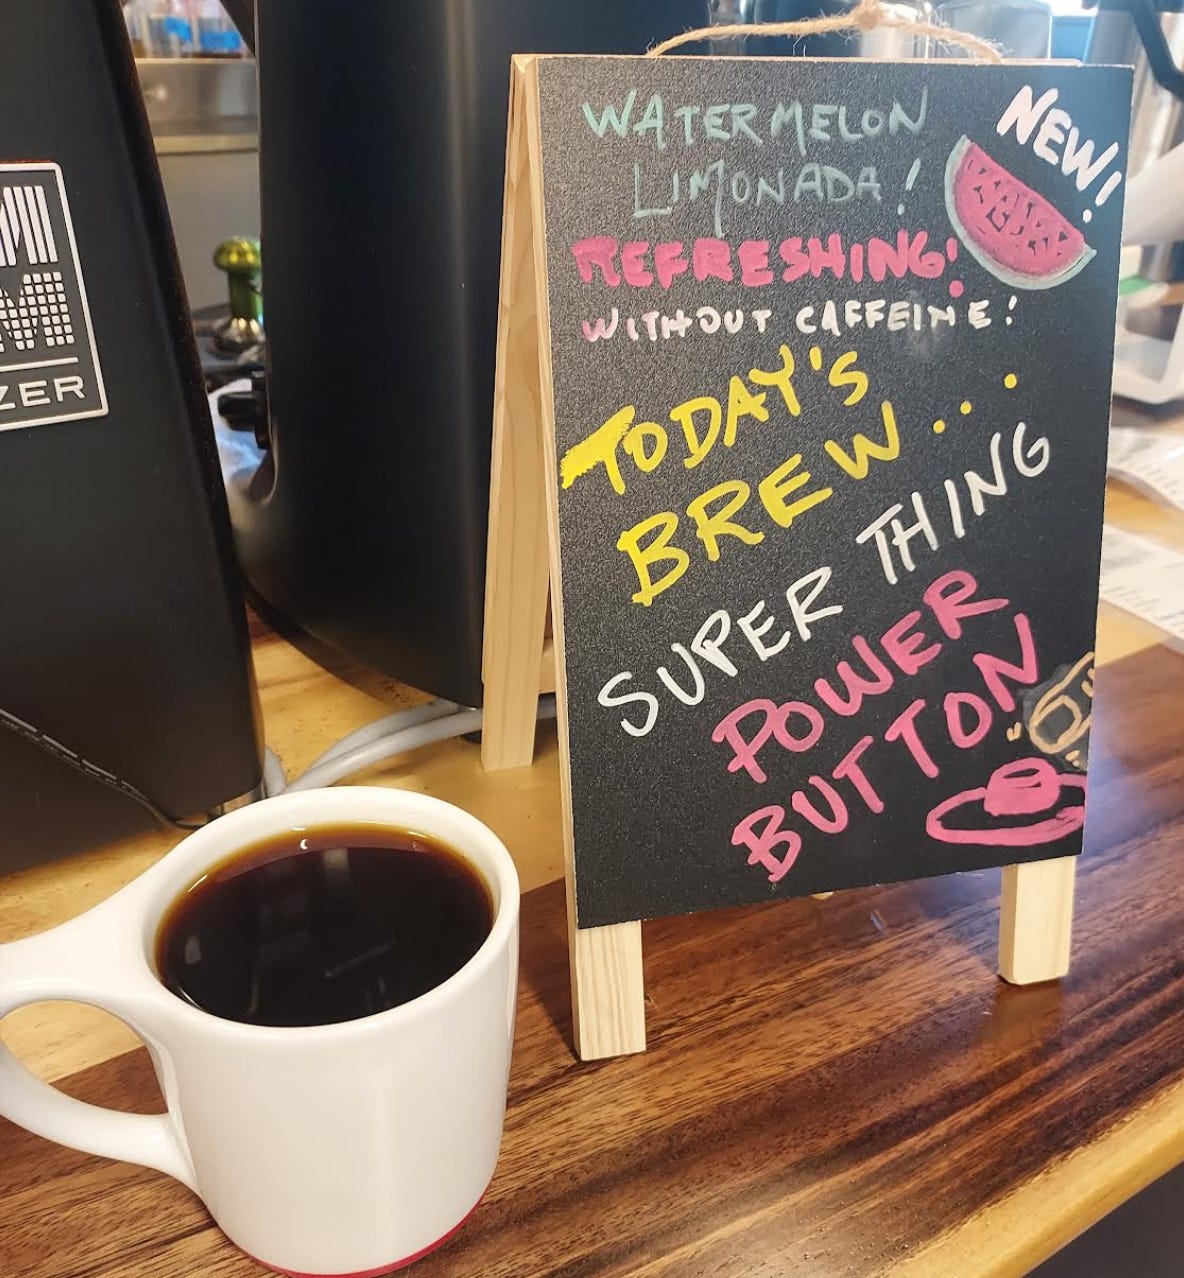 From an above angle: A white coffee cup is full of coffee next to a tabletop chalkboard sign declaring the brew is Super Thing Power Button next to a chalk drawing of a watermelon slice.